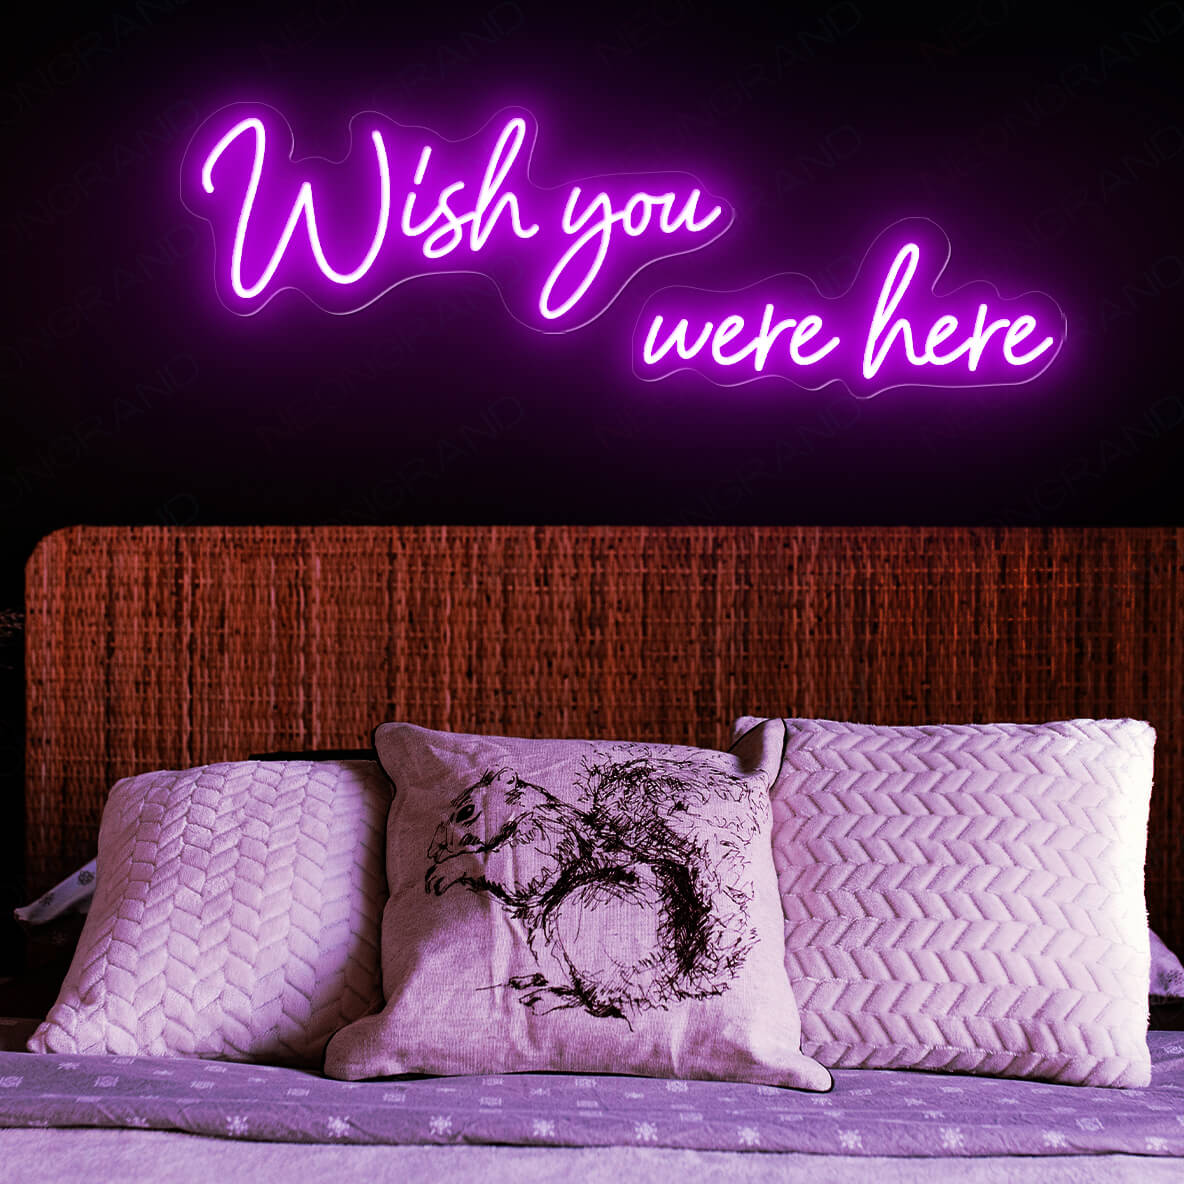 Wish You Were Here Neon Sign Love Light Up Led Sign purple